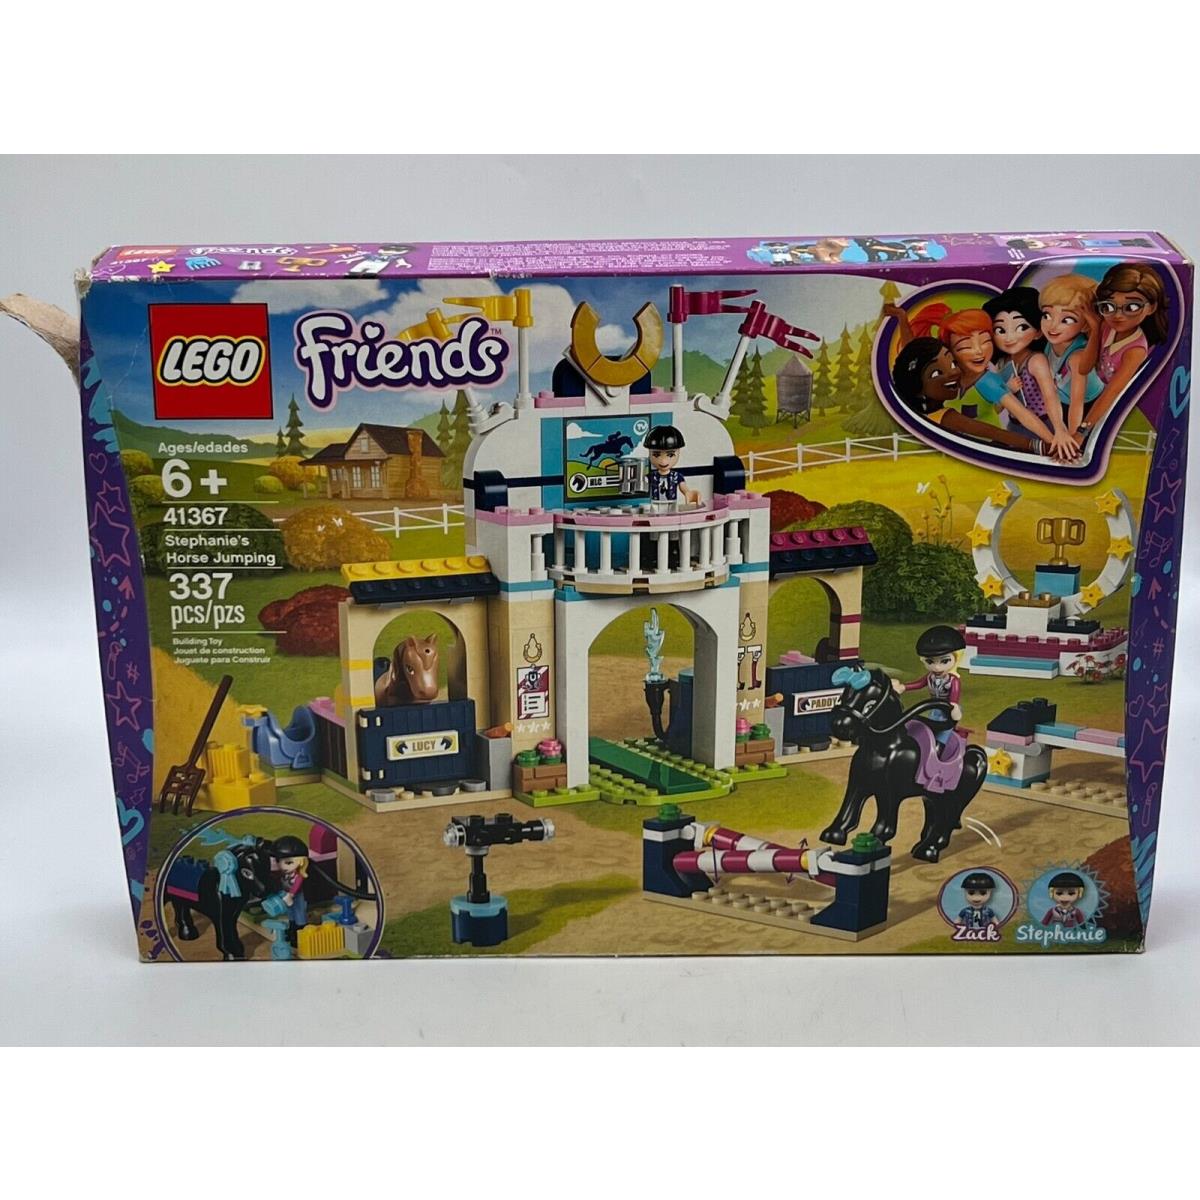 Lego Friends 41367 Stephanie`s Horse Jumping Retired